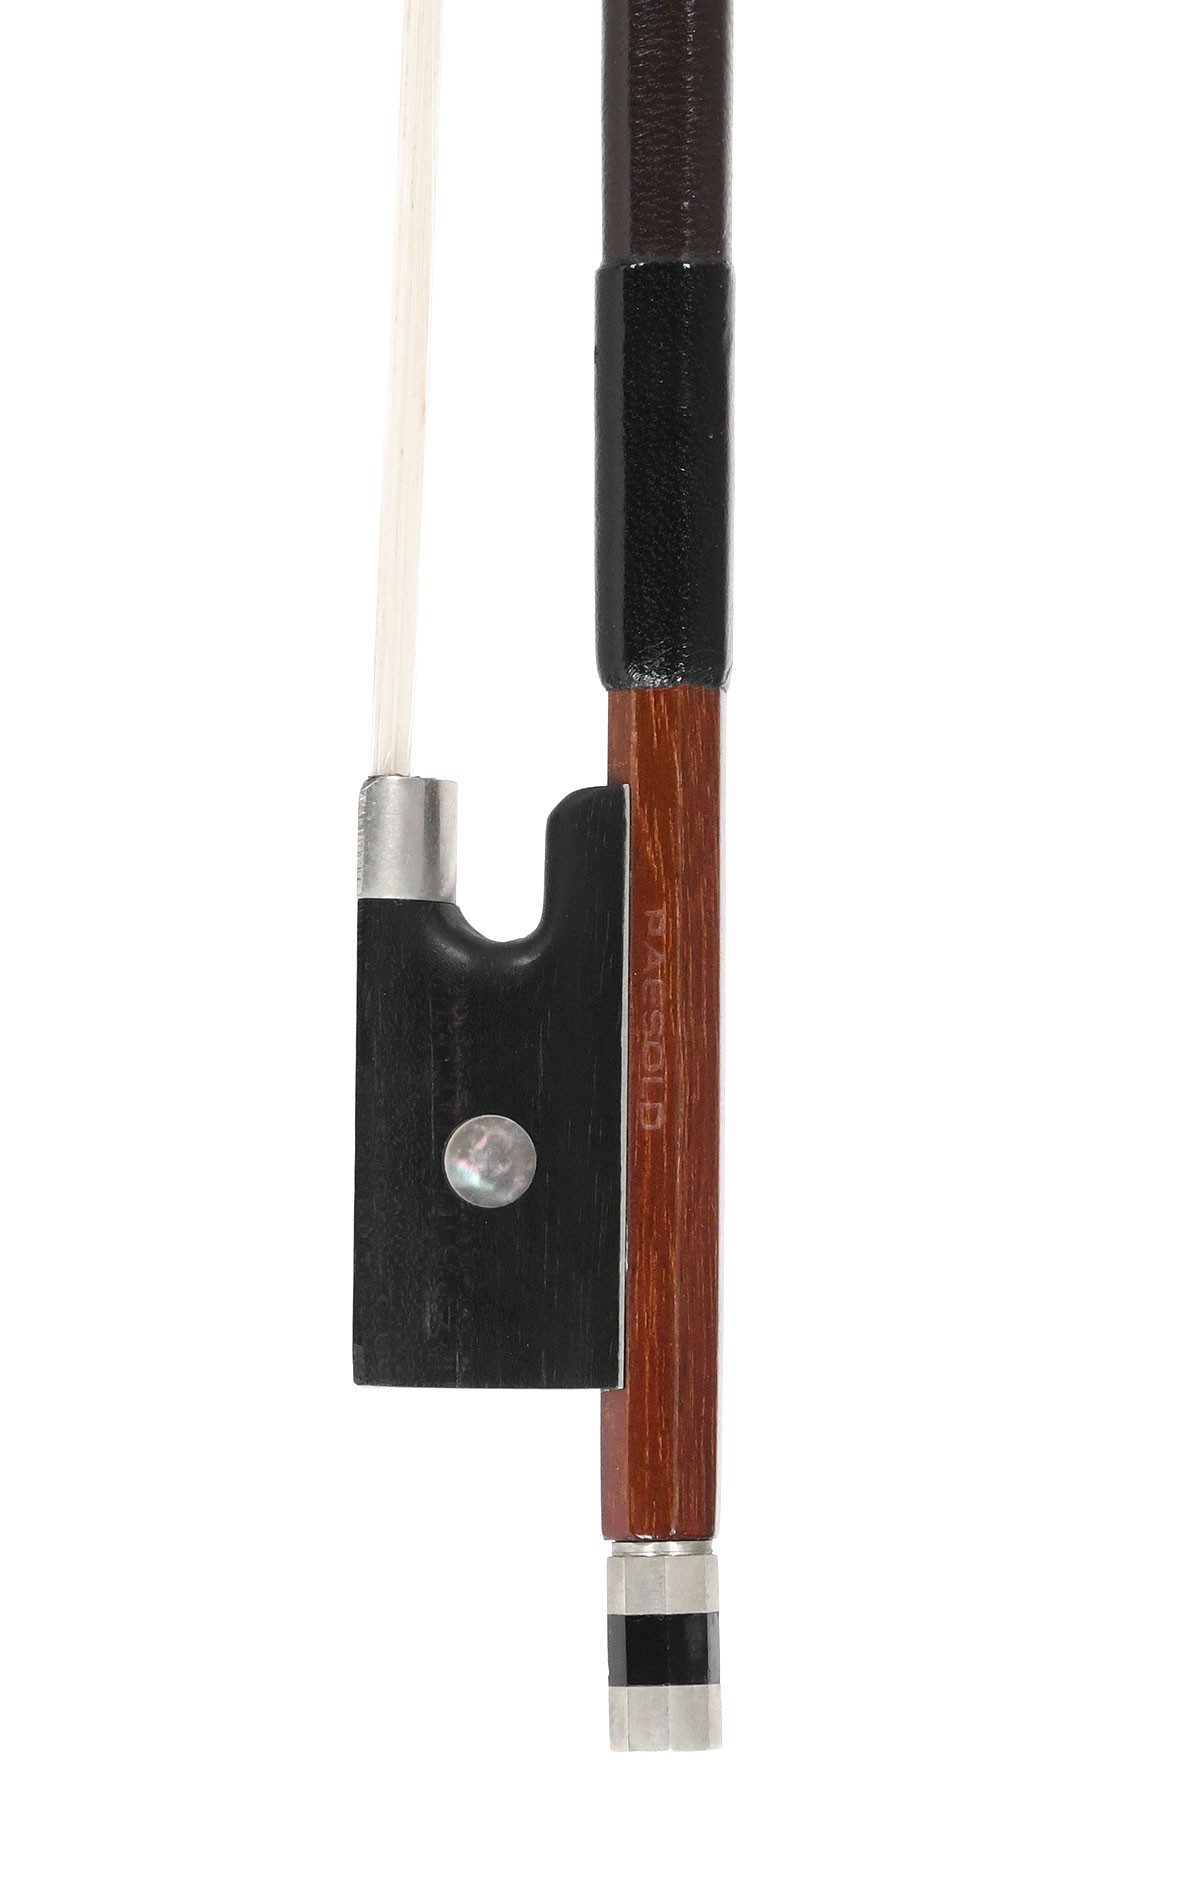 Violin bow from the Paesold workshop